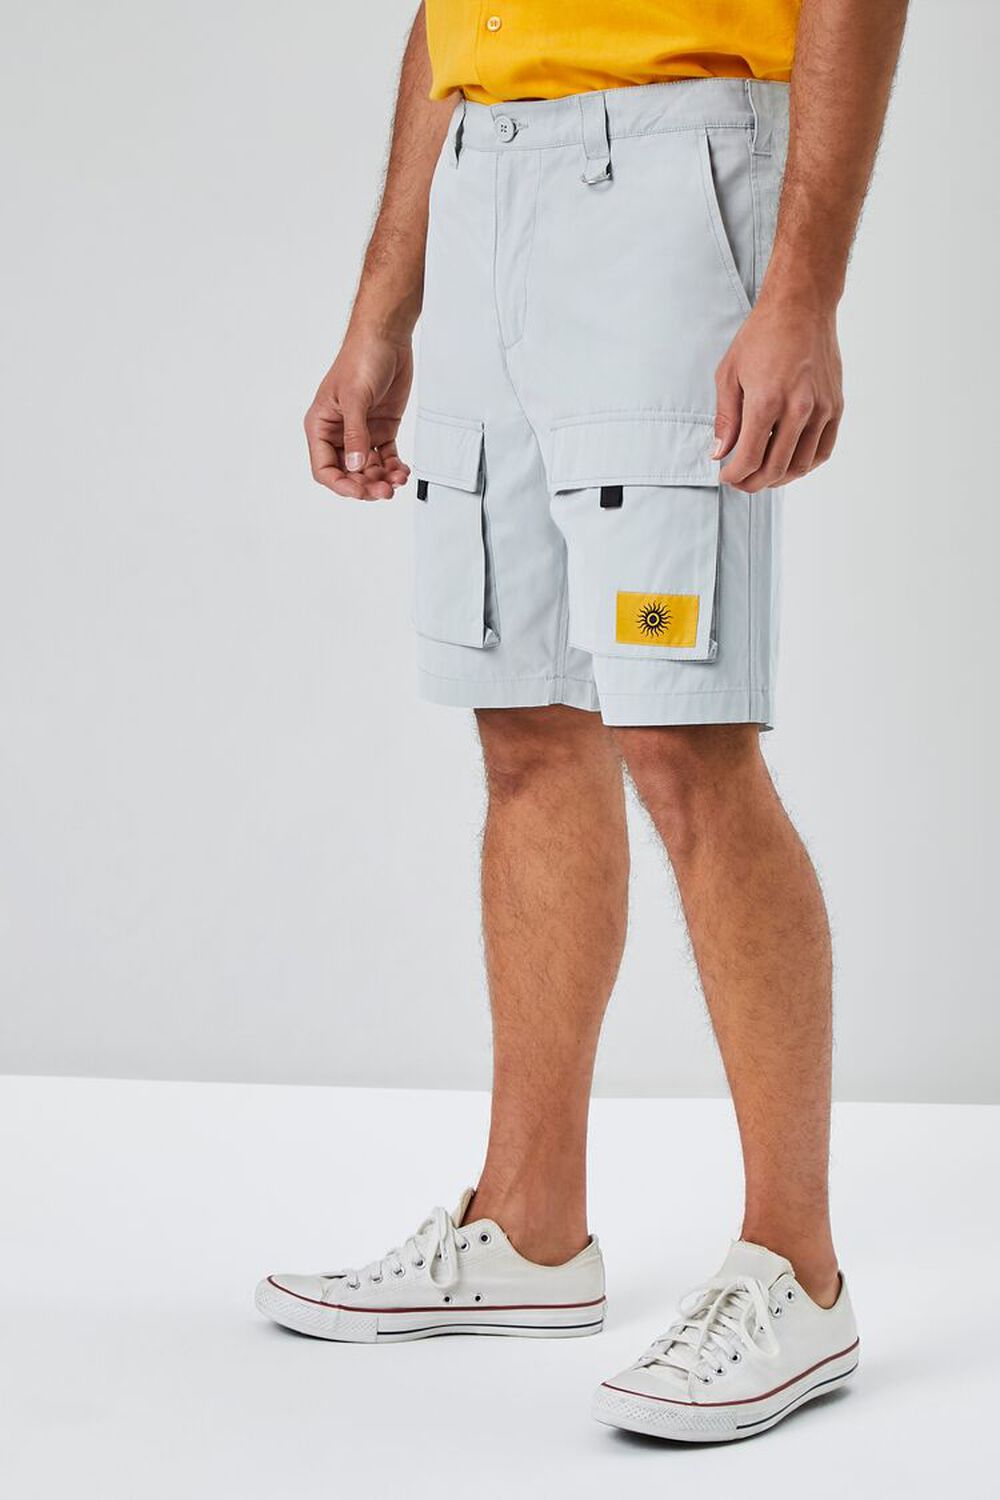 GREY Sun Patch Graphic Cargo Shorts, image 3